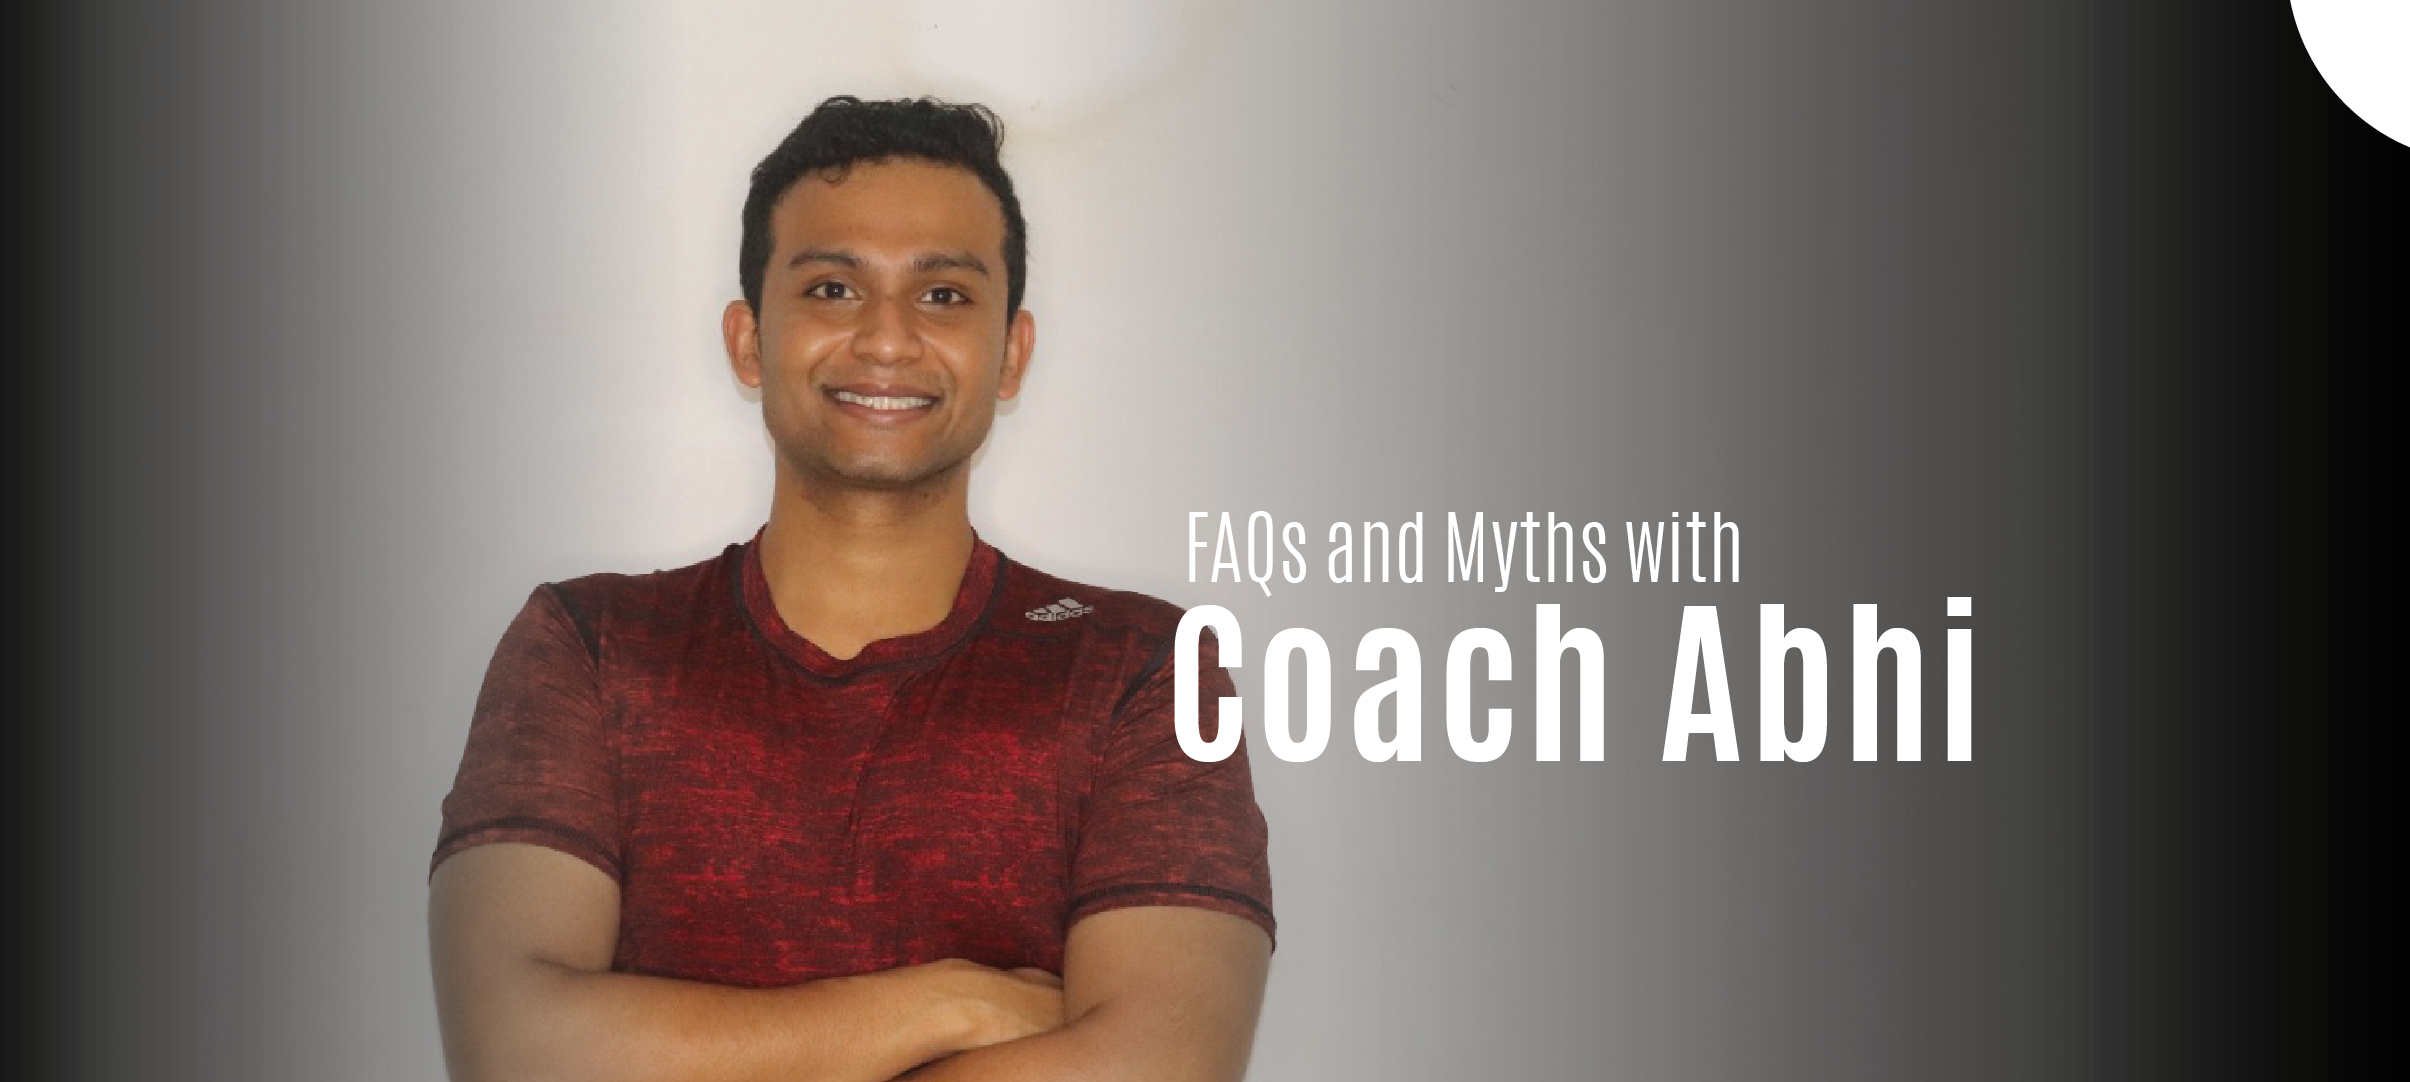 Abhishek answered fitness queries and busted common diet myths.